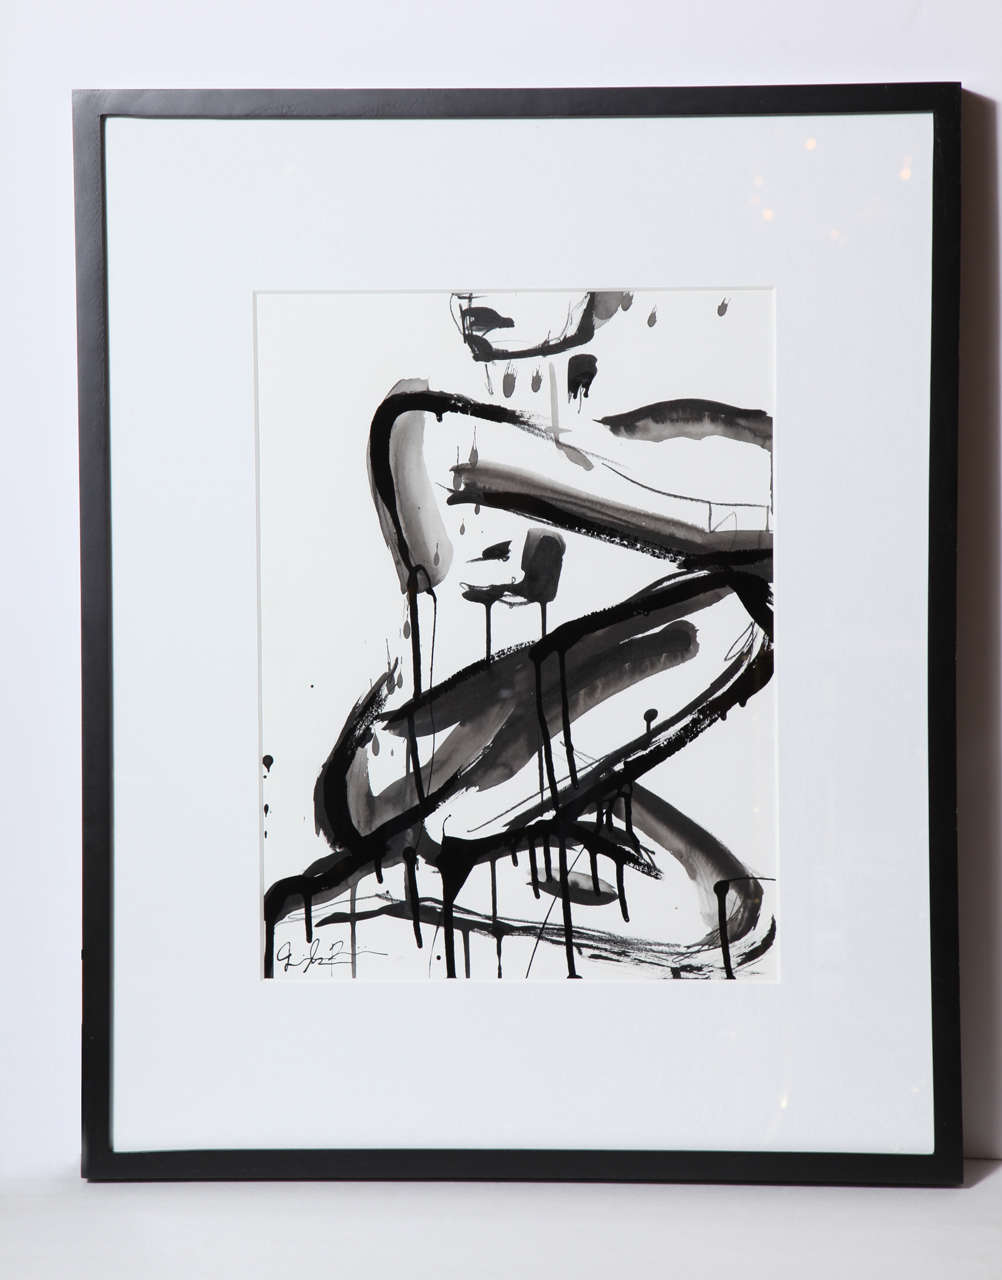 Beautiful nude by Jenna Snyder-Phillips. Sumi ink, charcoal and lacquer.
Artist is educated in Italy and USA. 
100% archive cotton paper. The painting is 15 inches by 20 inches and the matte is 4.5 inches wide.